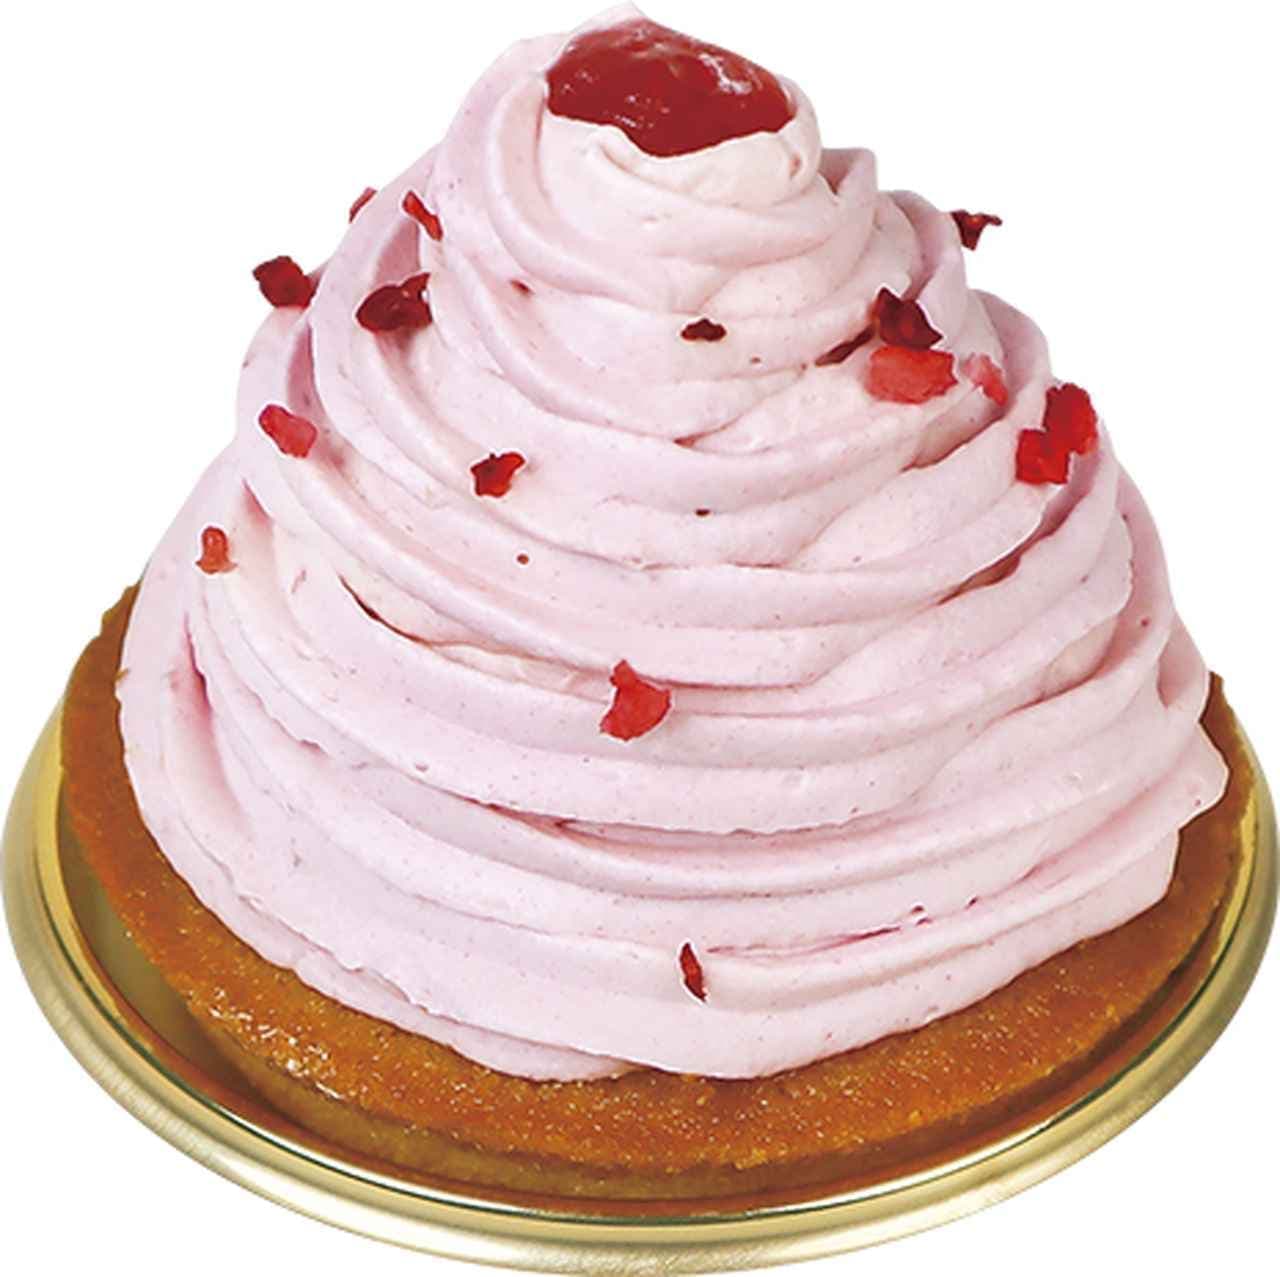 Fujiya's "Domestic Strawberry Napoleon Pie" and other new strawberry fairs